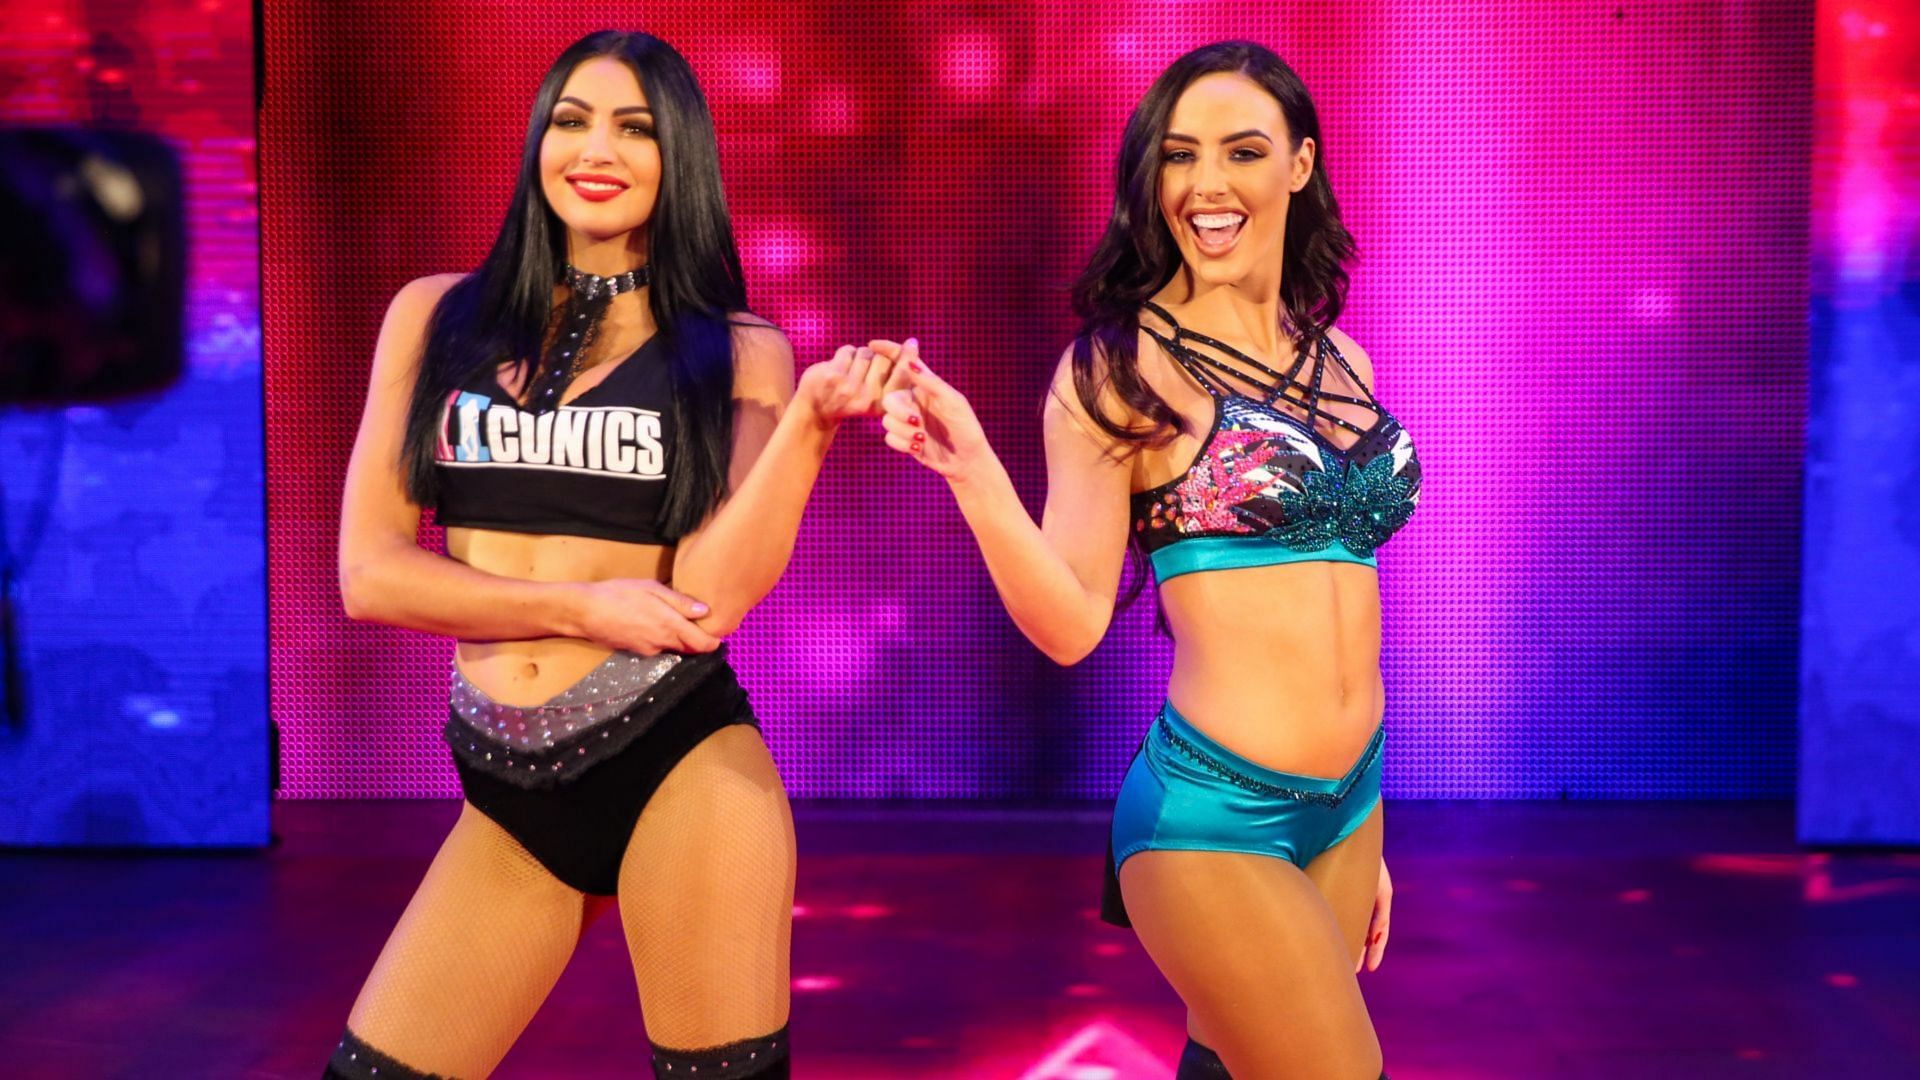 The IIconics have stepped away from professional wrestling